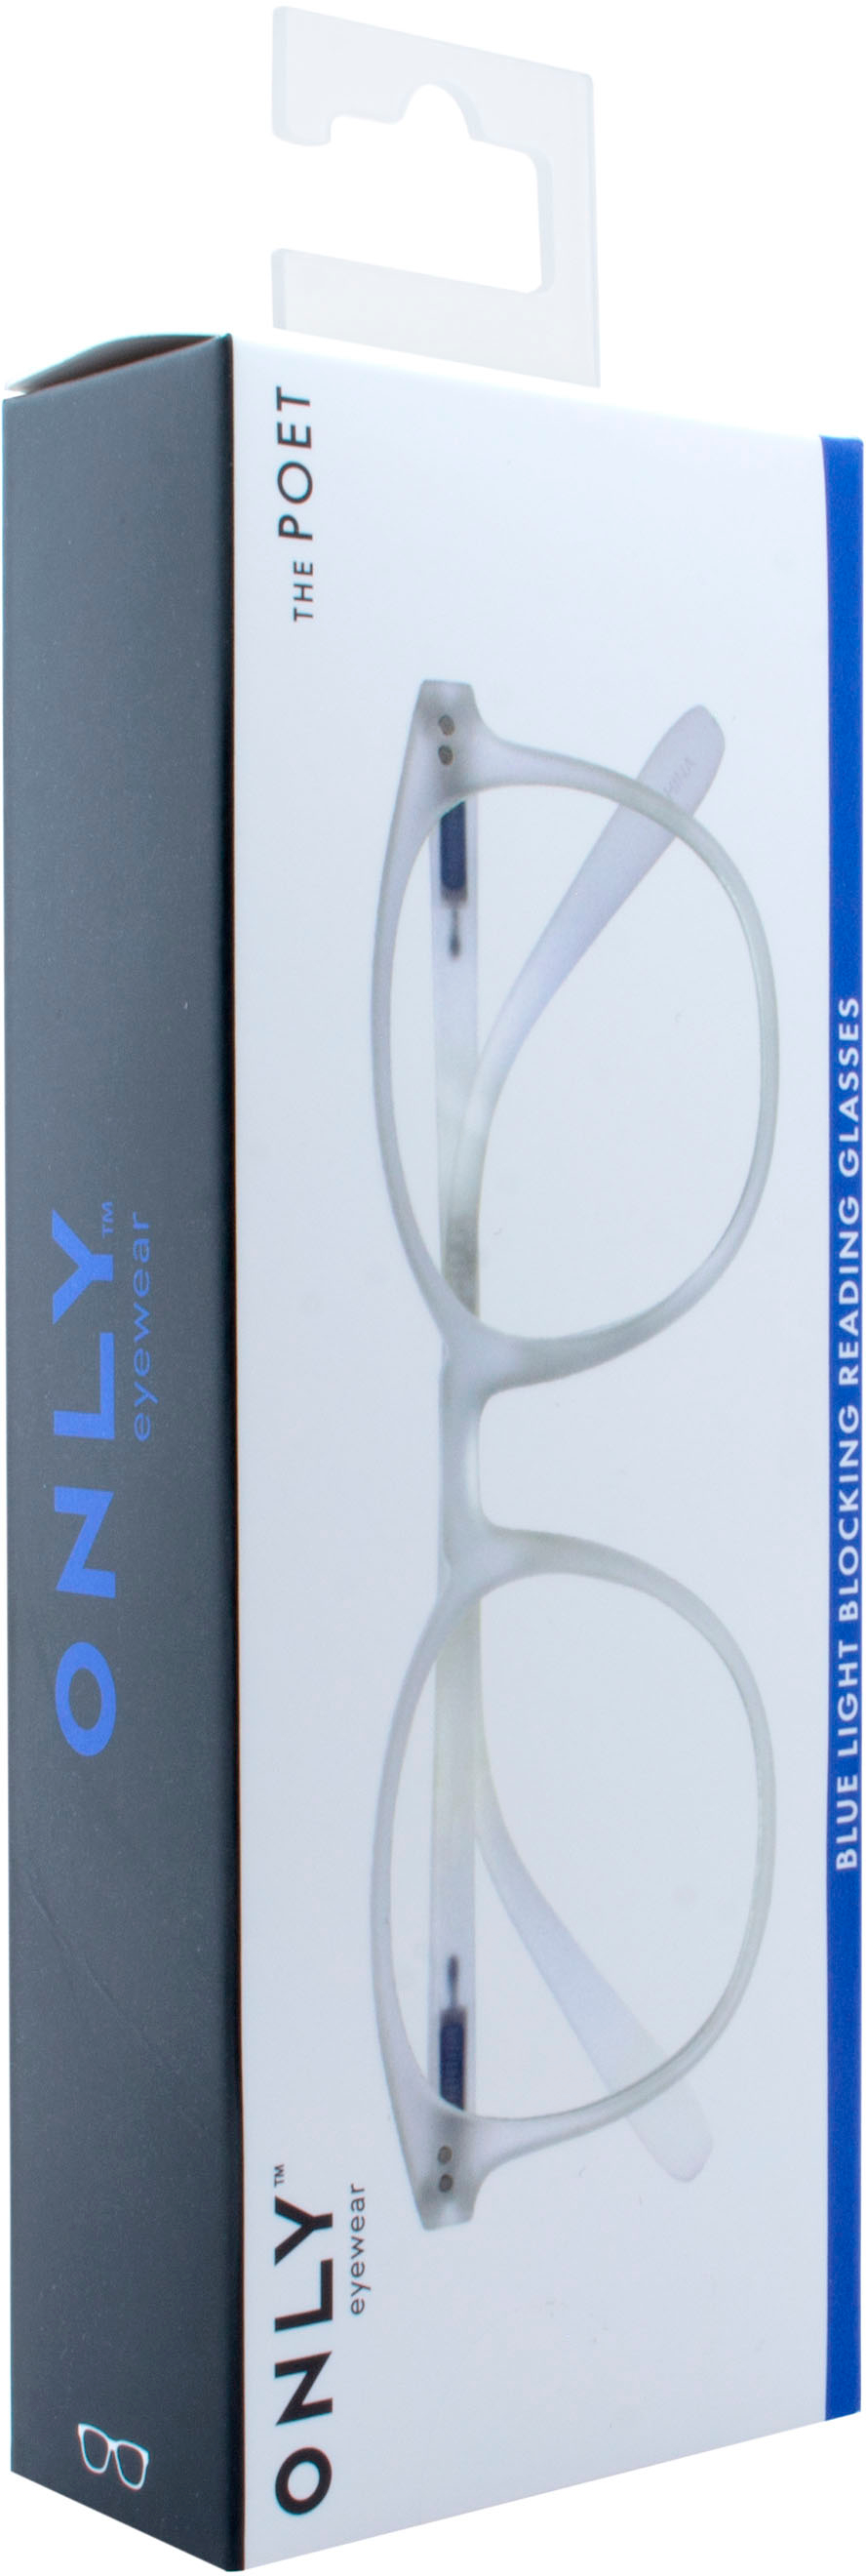 Wavebalance Selby Blue Light Reducing Computer and Device Glasses, Crystal, One Size